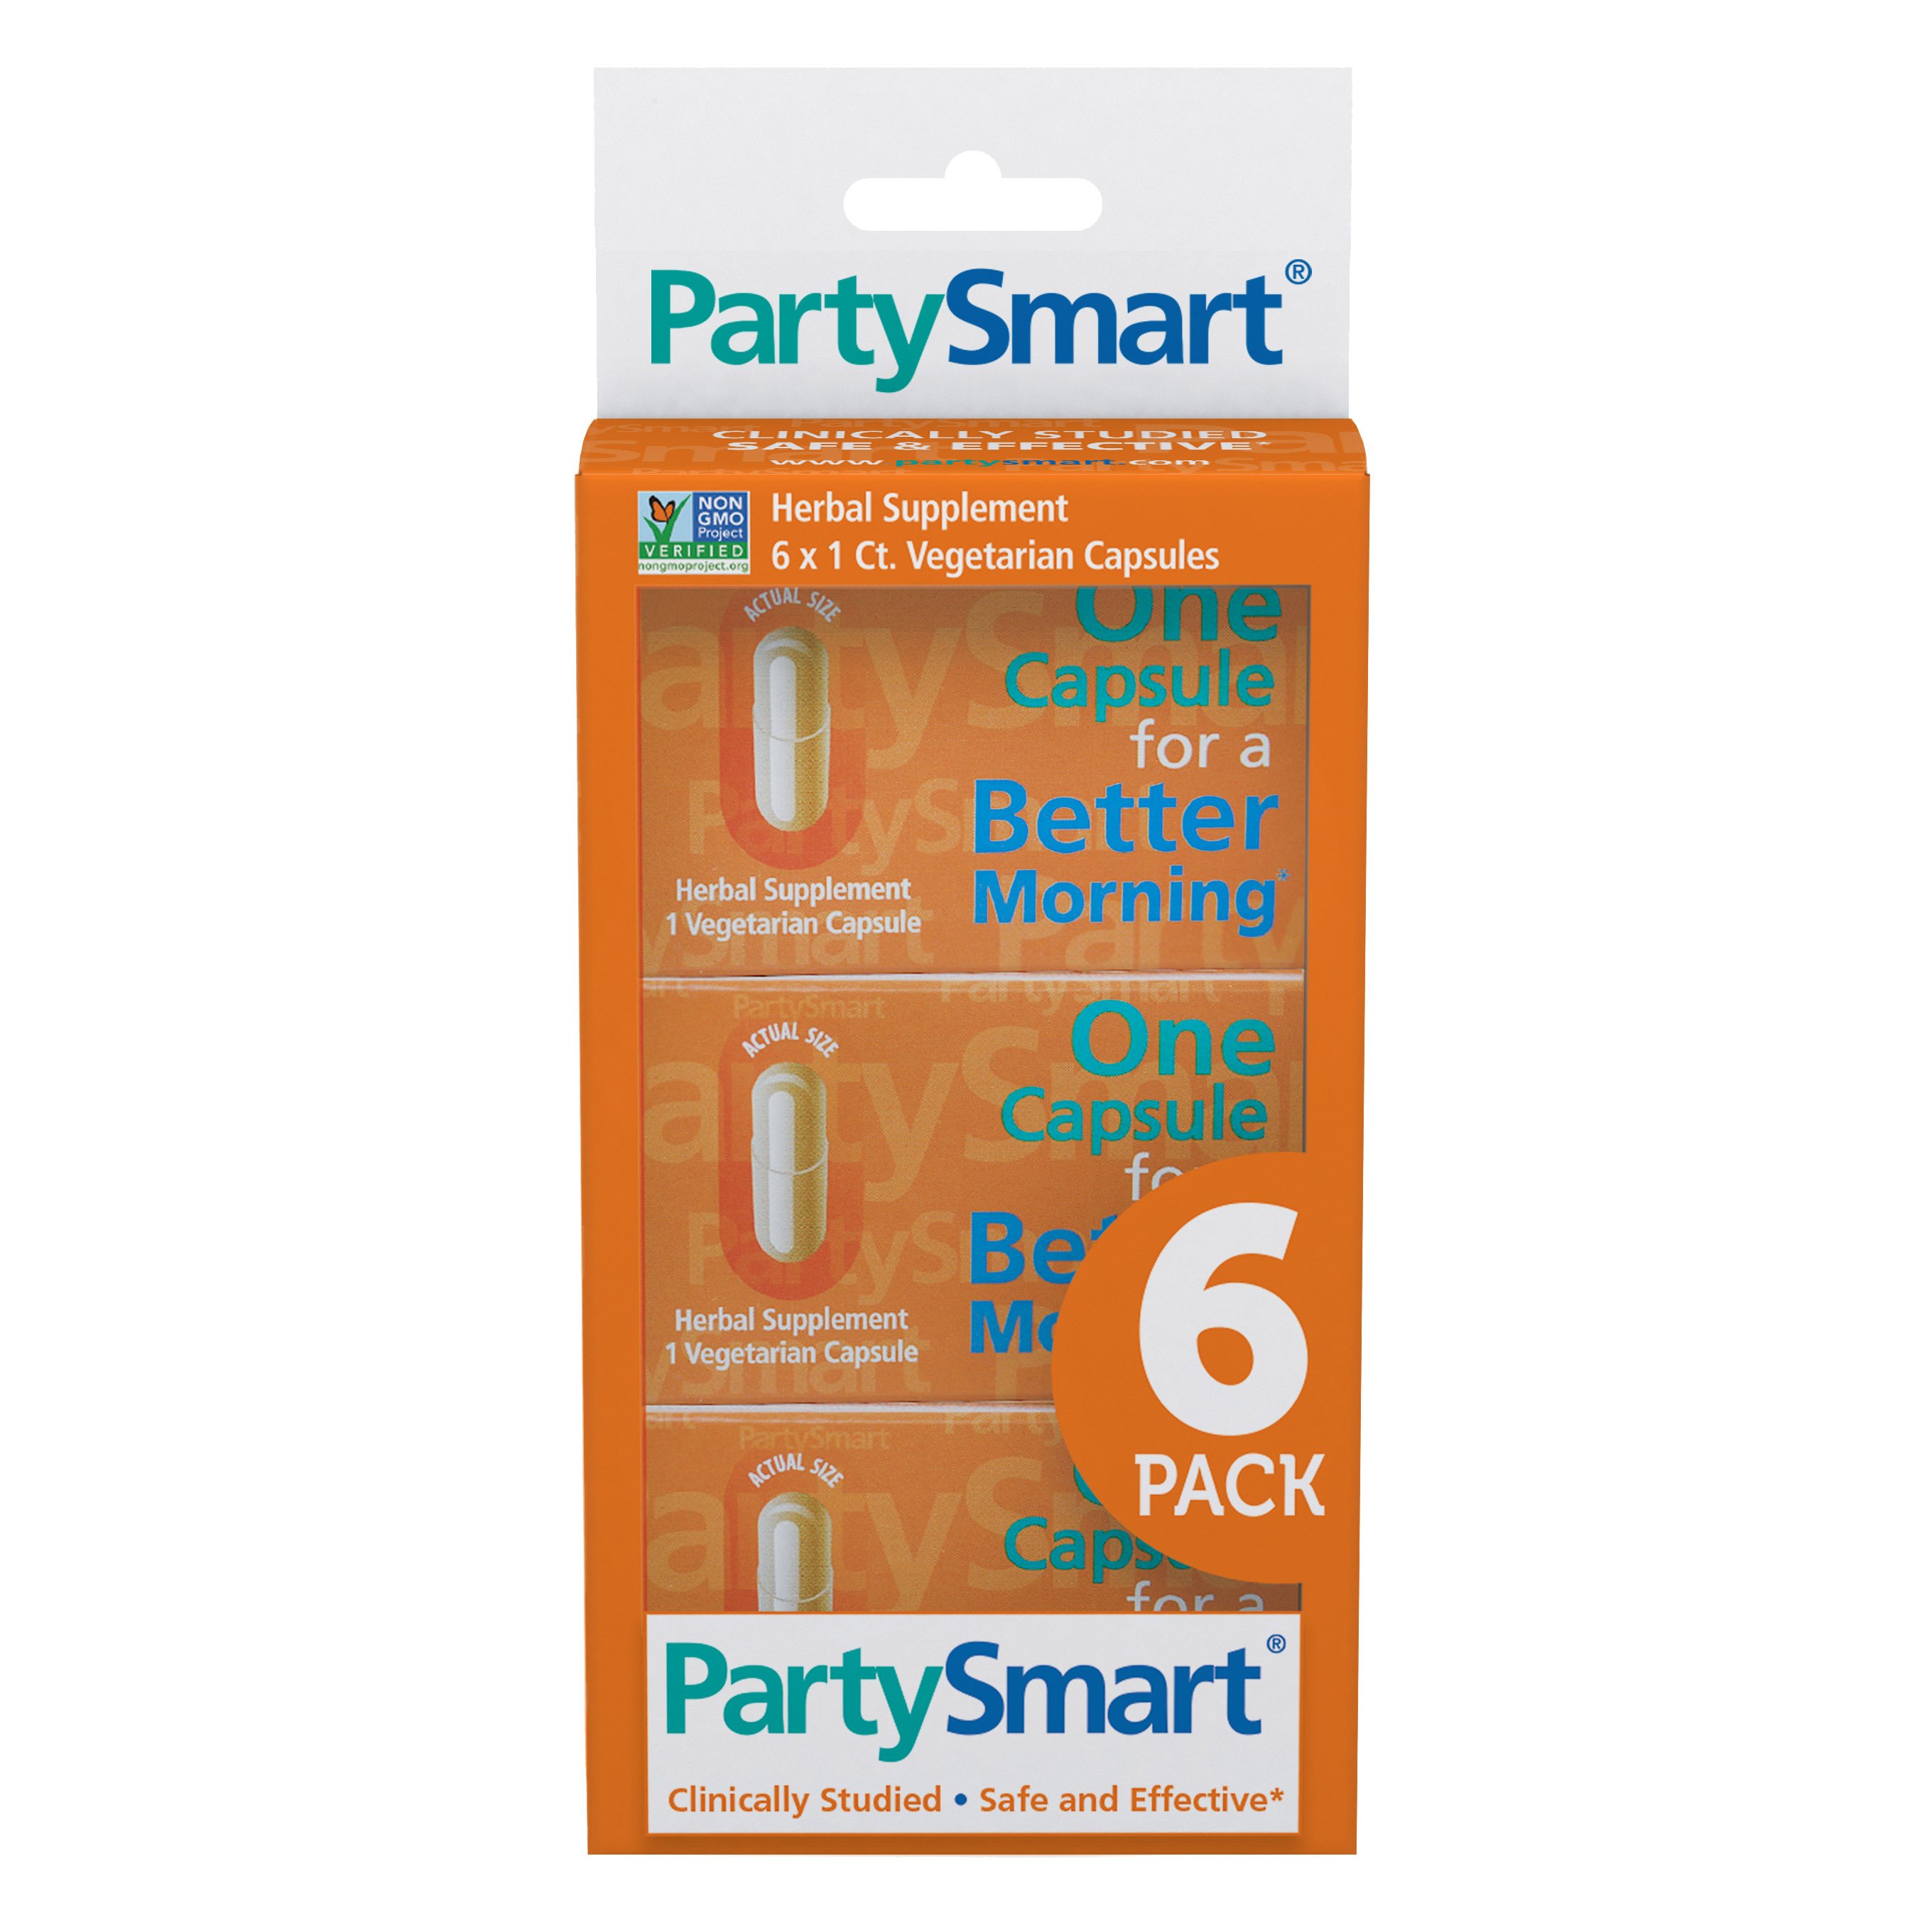 How It Works – Party Smart